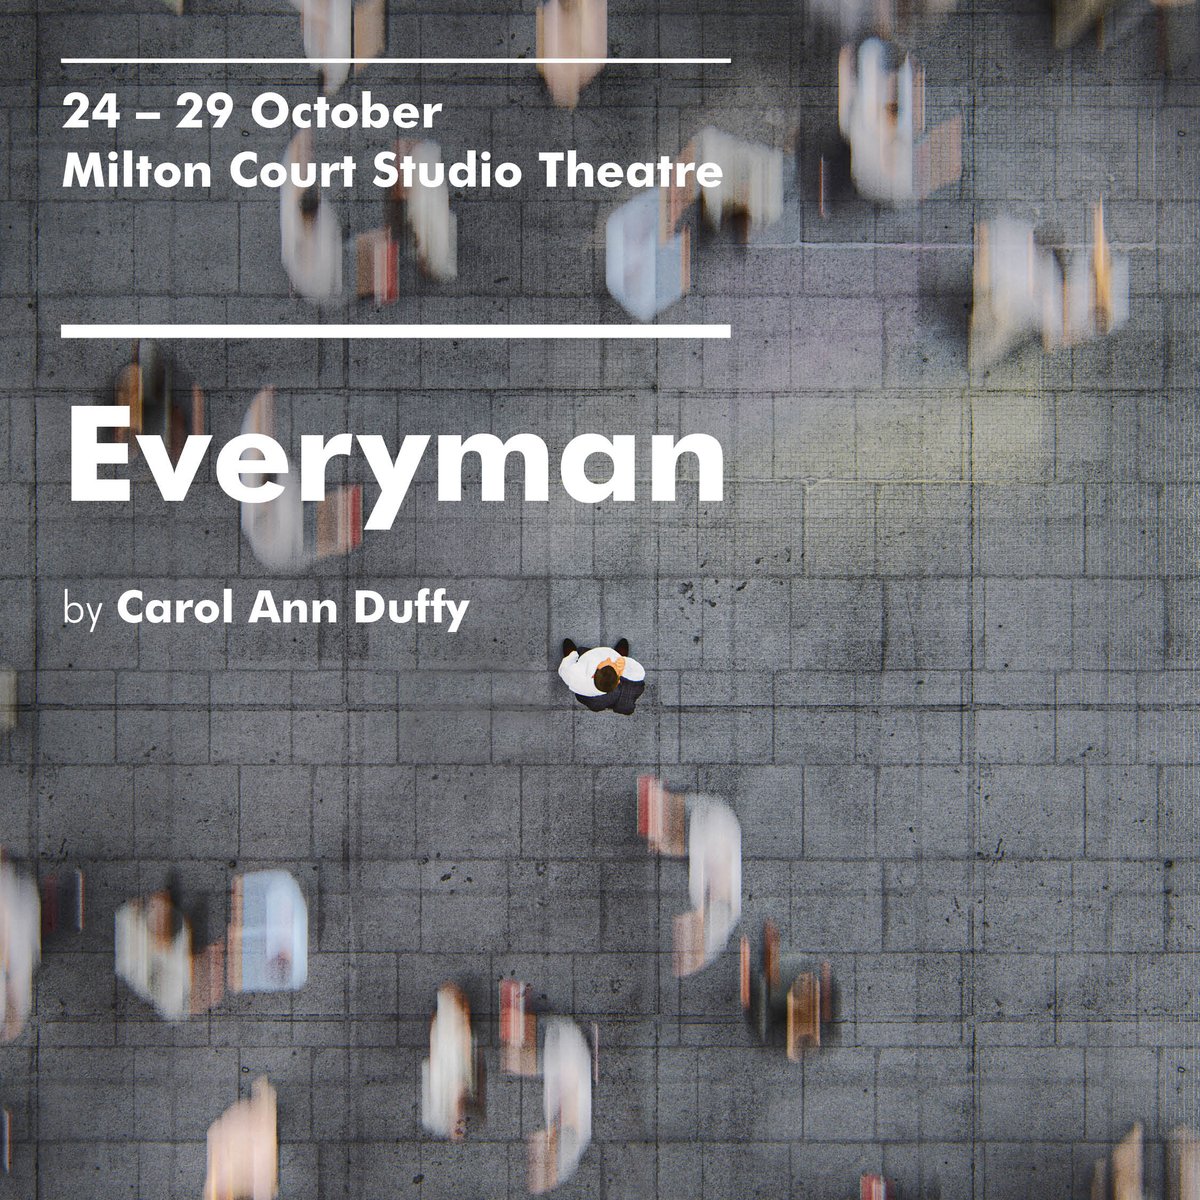 Not one, but two thrilling Guildhall drama productions take place next week: ⚡️HYDE & SEEK, written & directed by @TristanFAiduenu ⚡️EVERYMAN by Carol Ann Duffy, directed by Katherine Nesbitt Tickets are just £10 🎟️ book your seat here >> bit.ly/3ScMMhn